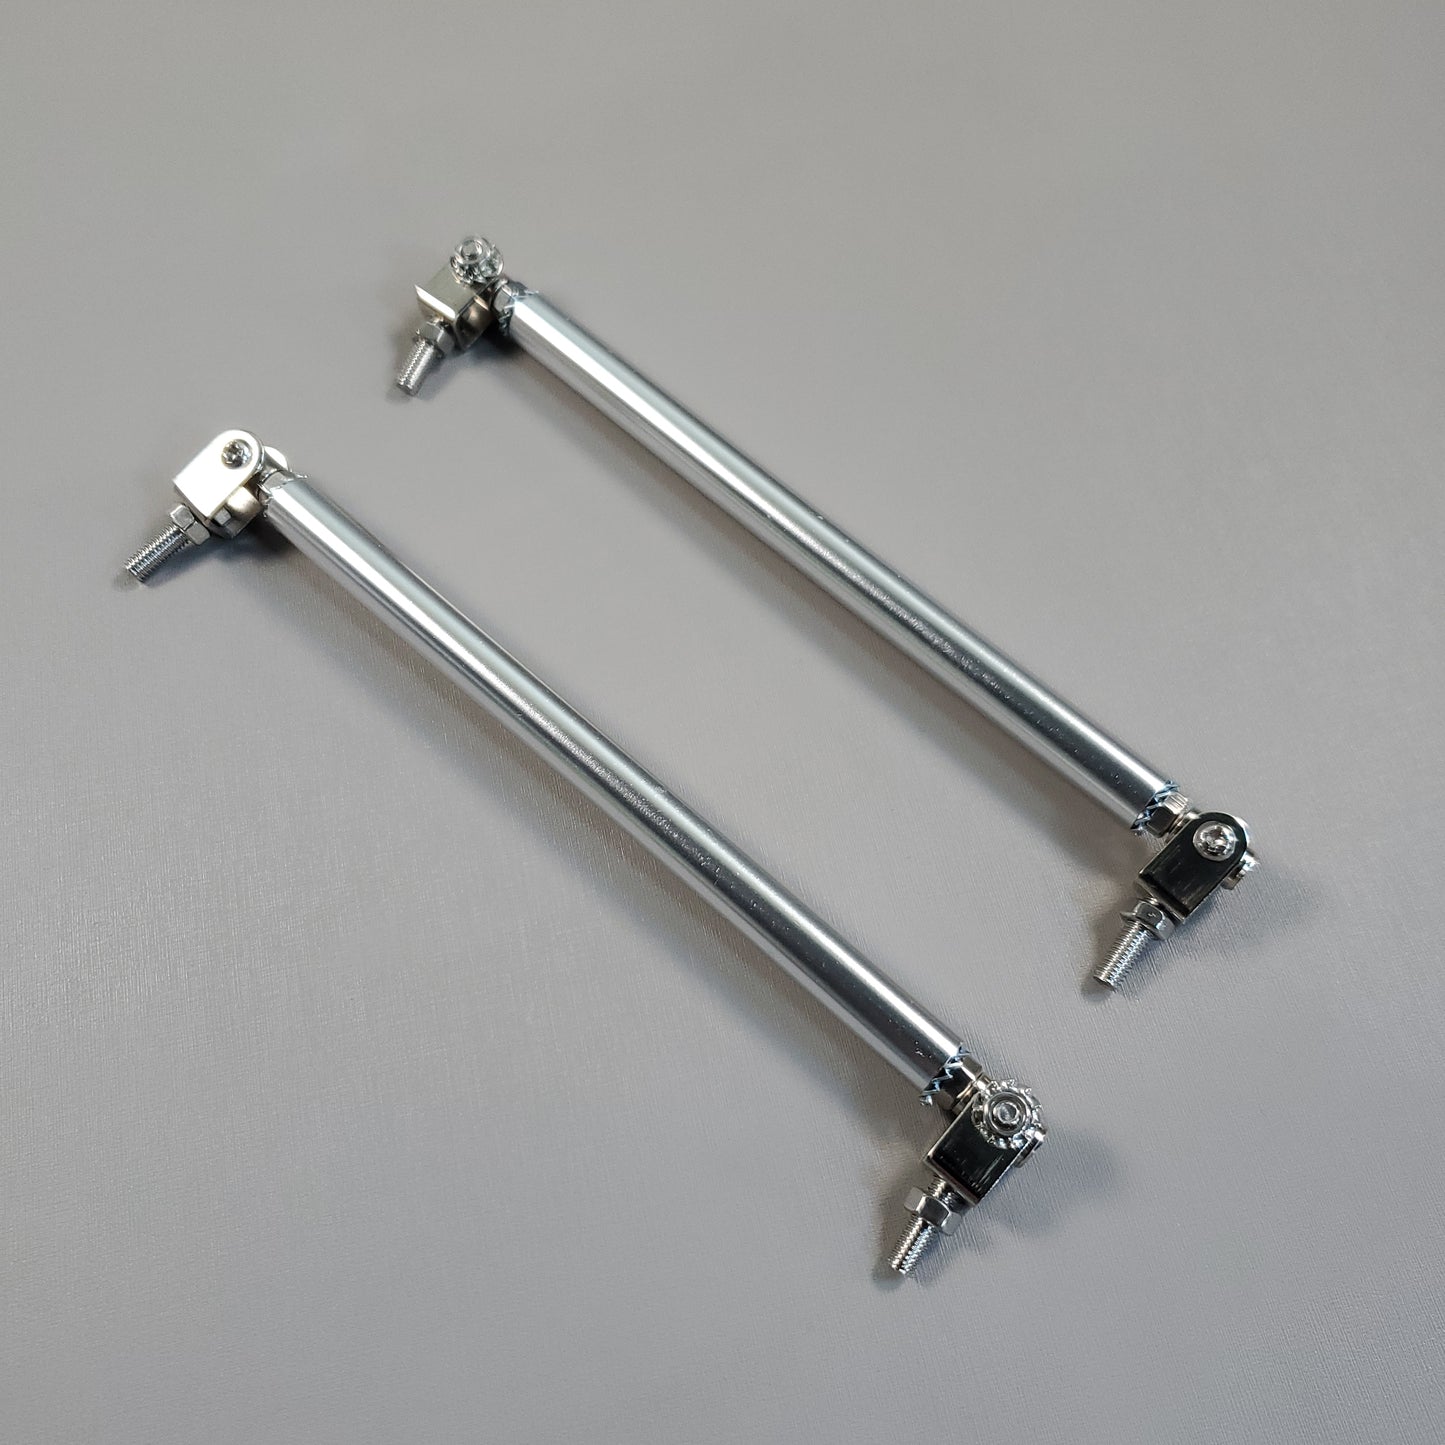 Set Of 2 Wind Splitter Support Rods Turnbuckle Adjustable Tensioners Stainless / Aluminum (New)